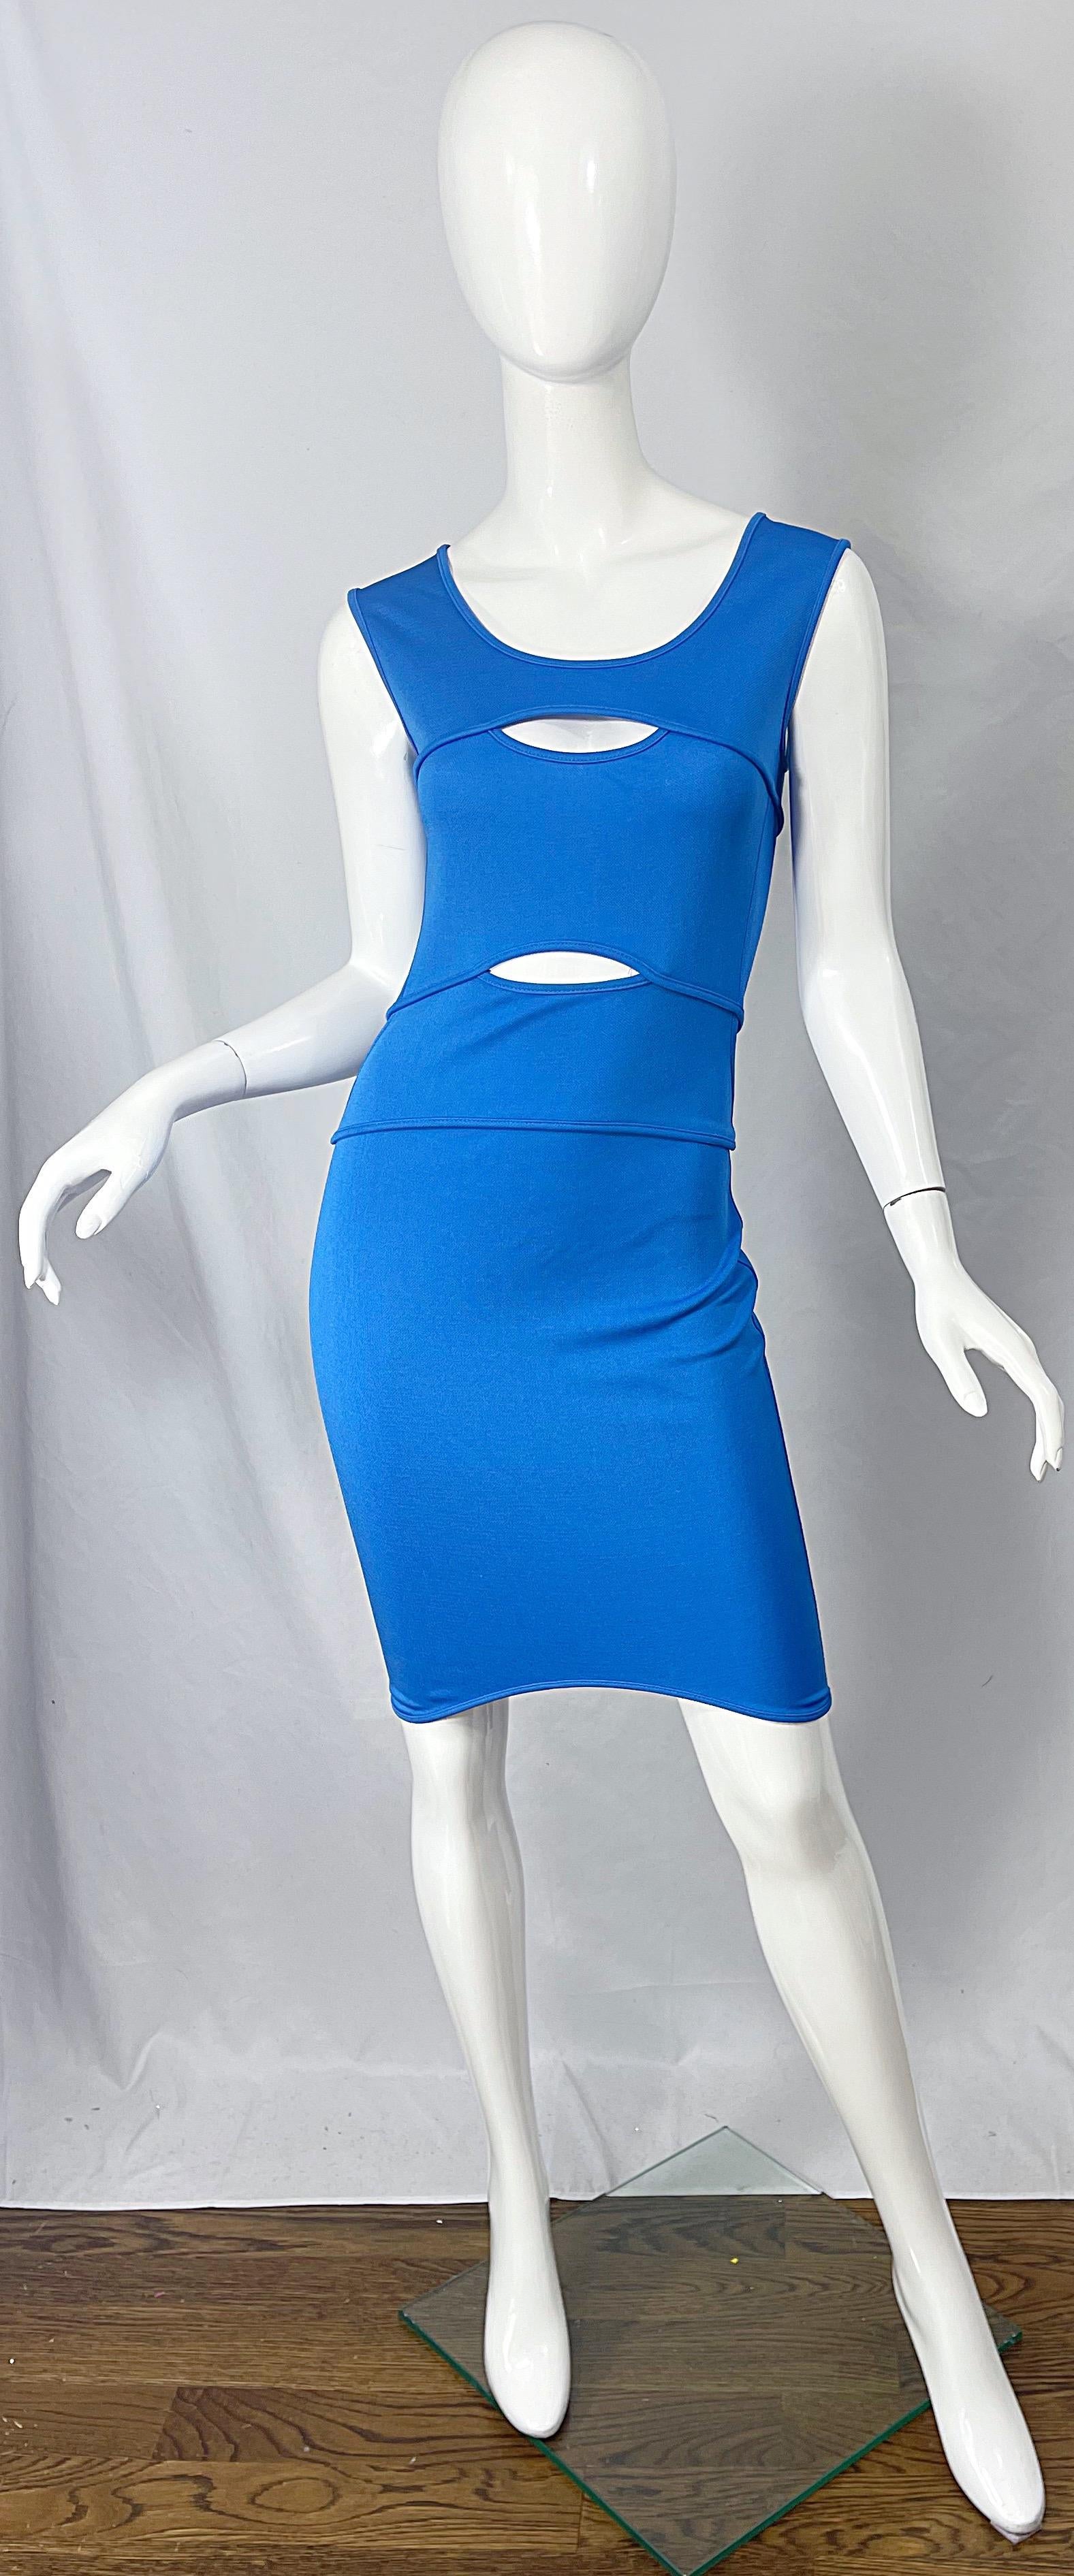 Sexy late 80s THIERRY MUGLER blue cut-out bod con dress ! Features a form fitting stretch rayon fabric with cut-out above the bust and under. Hidden zipper up the back with hook-and-eye closure. The perfect alternative to a little black dress. This